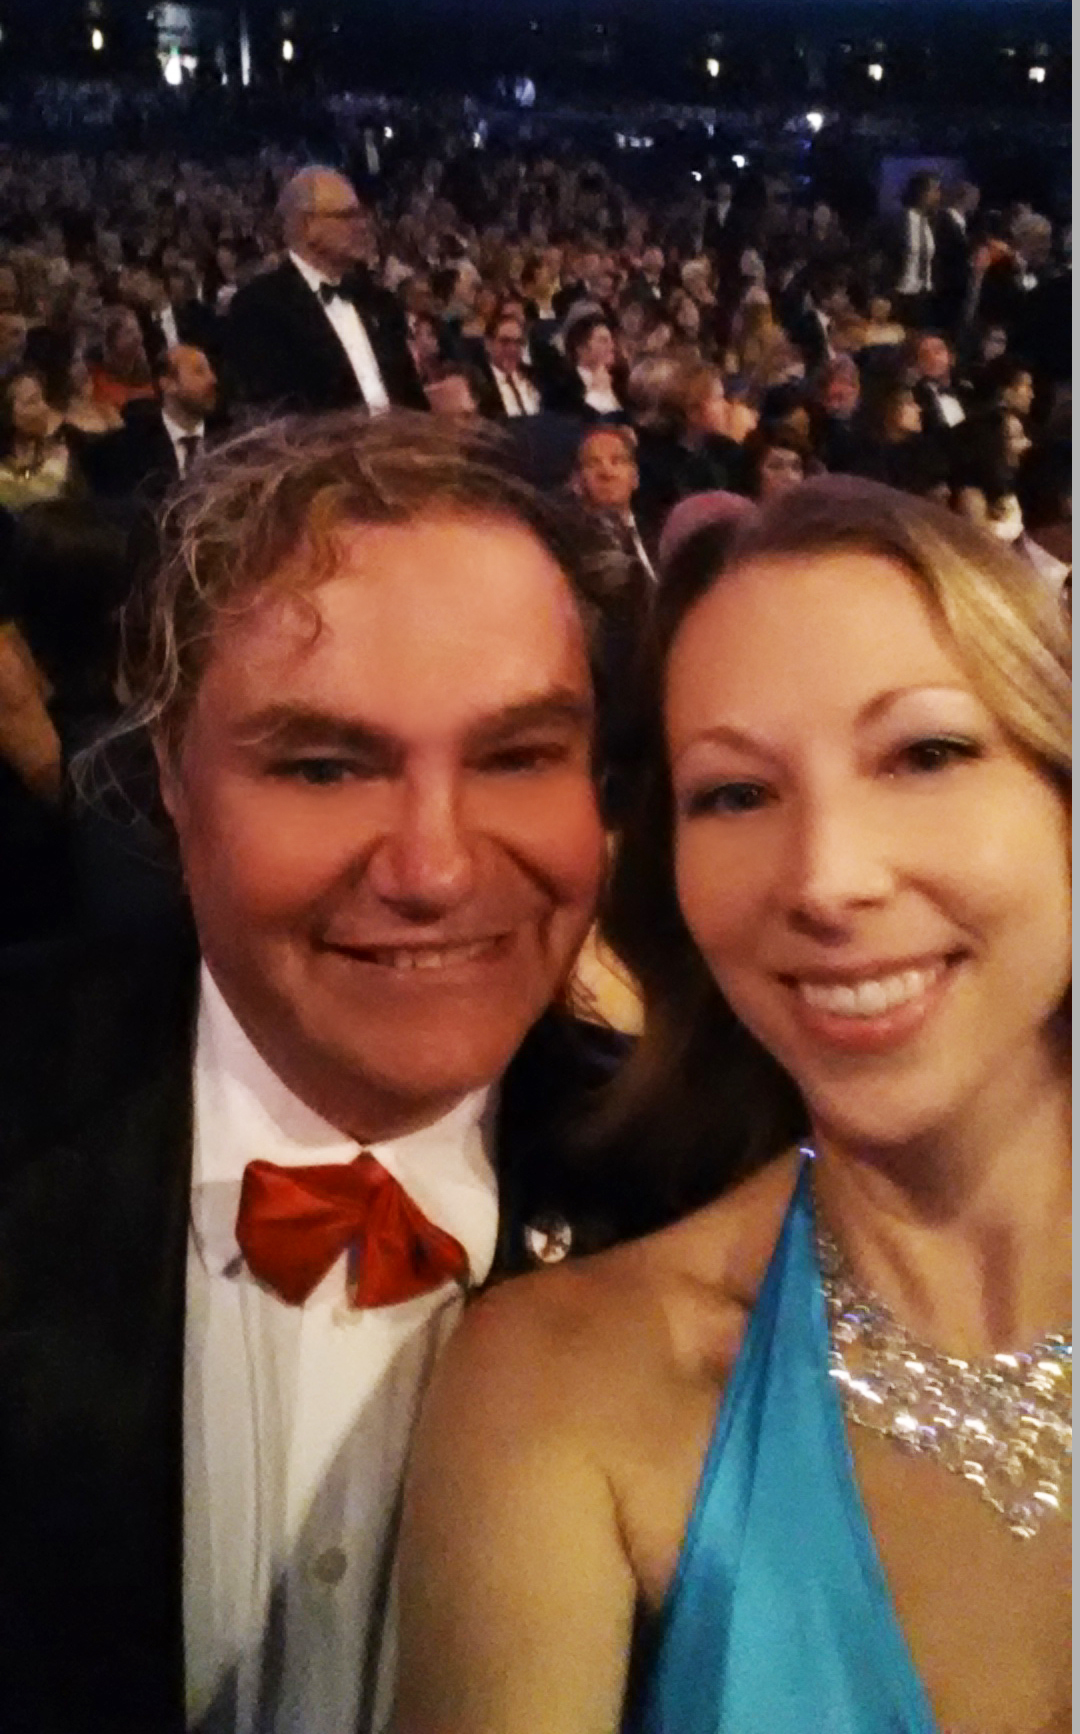 Jennifer Day with her television producer, Grammy nominee Pierre Patrick at the Emmys